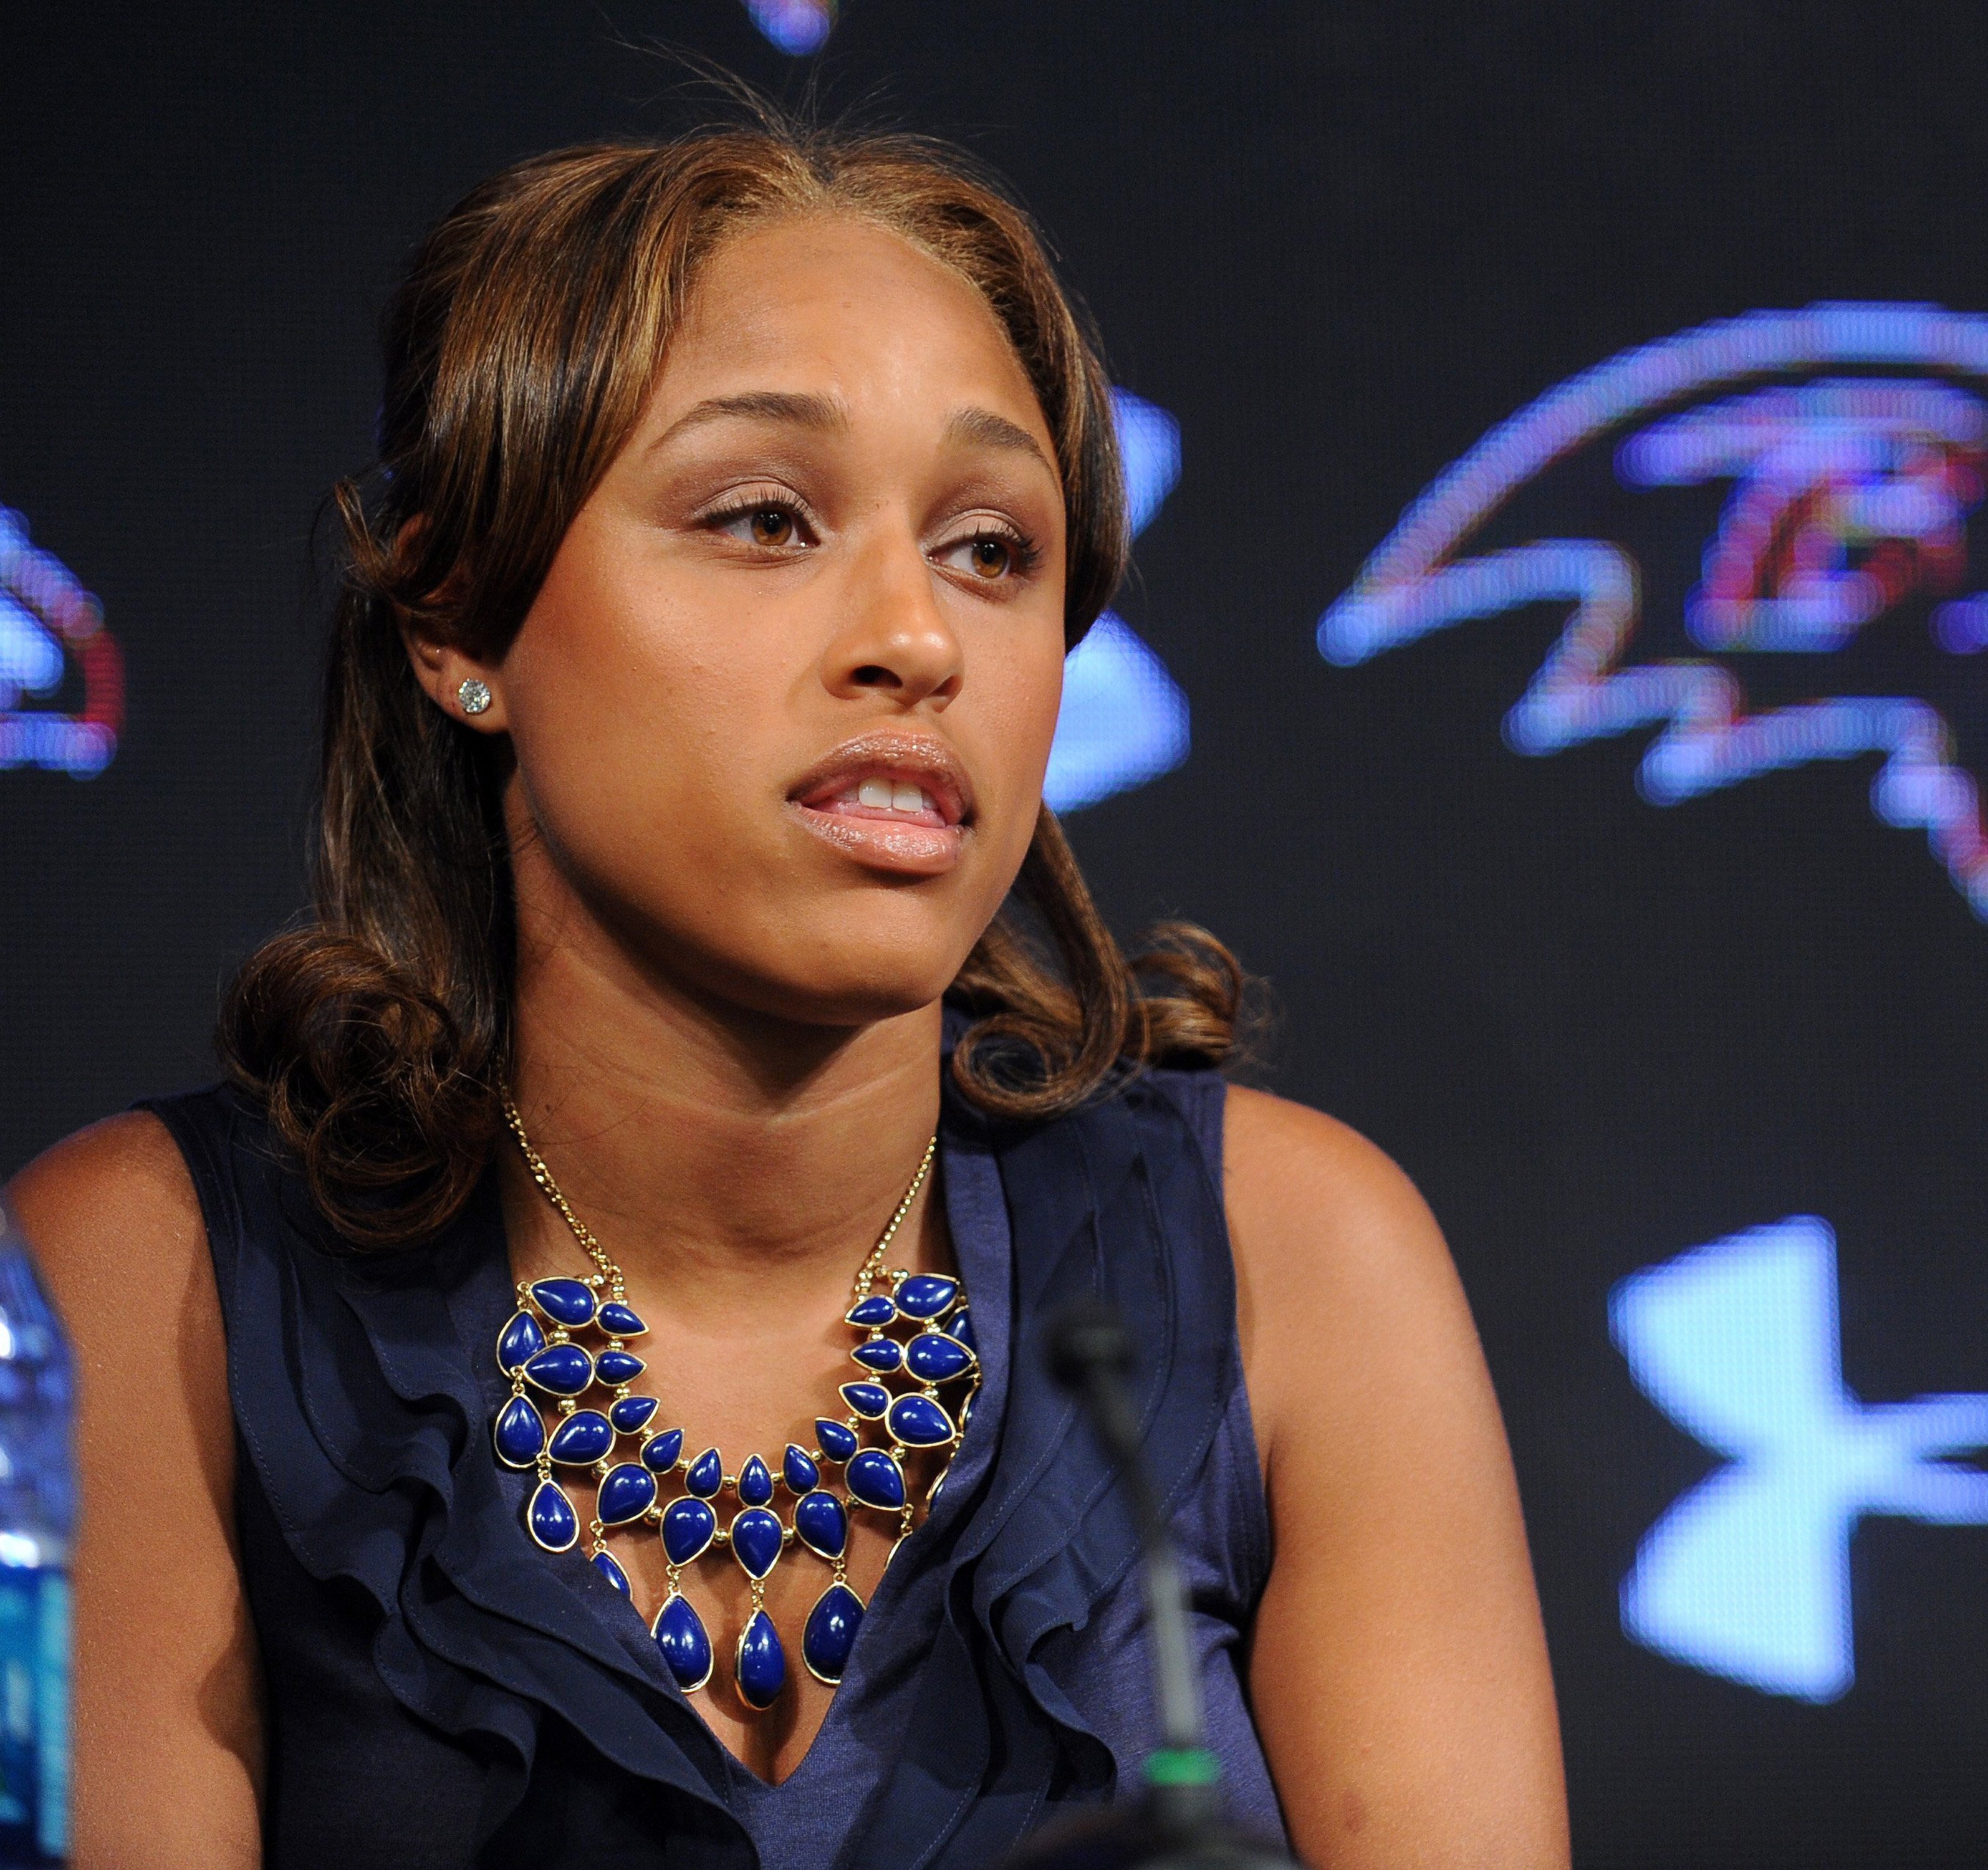 Janay Rice, wife of Ravens running back Ray Rice, made a statement to the news media May 5, 2014, at the Under Armour Performance Center in Owings Mills, Md, regarding his assault charge for knocking her unconscious in a New Jersey casino (Baltimore Sun—MCT via Getty Images)